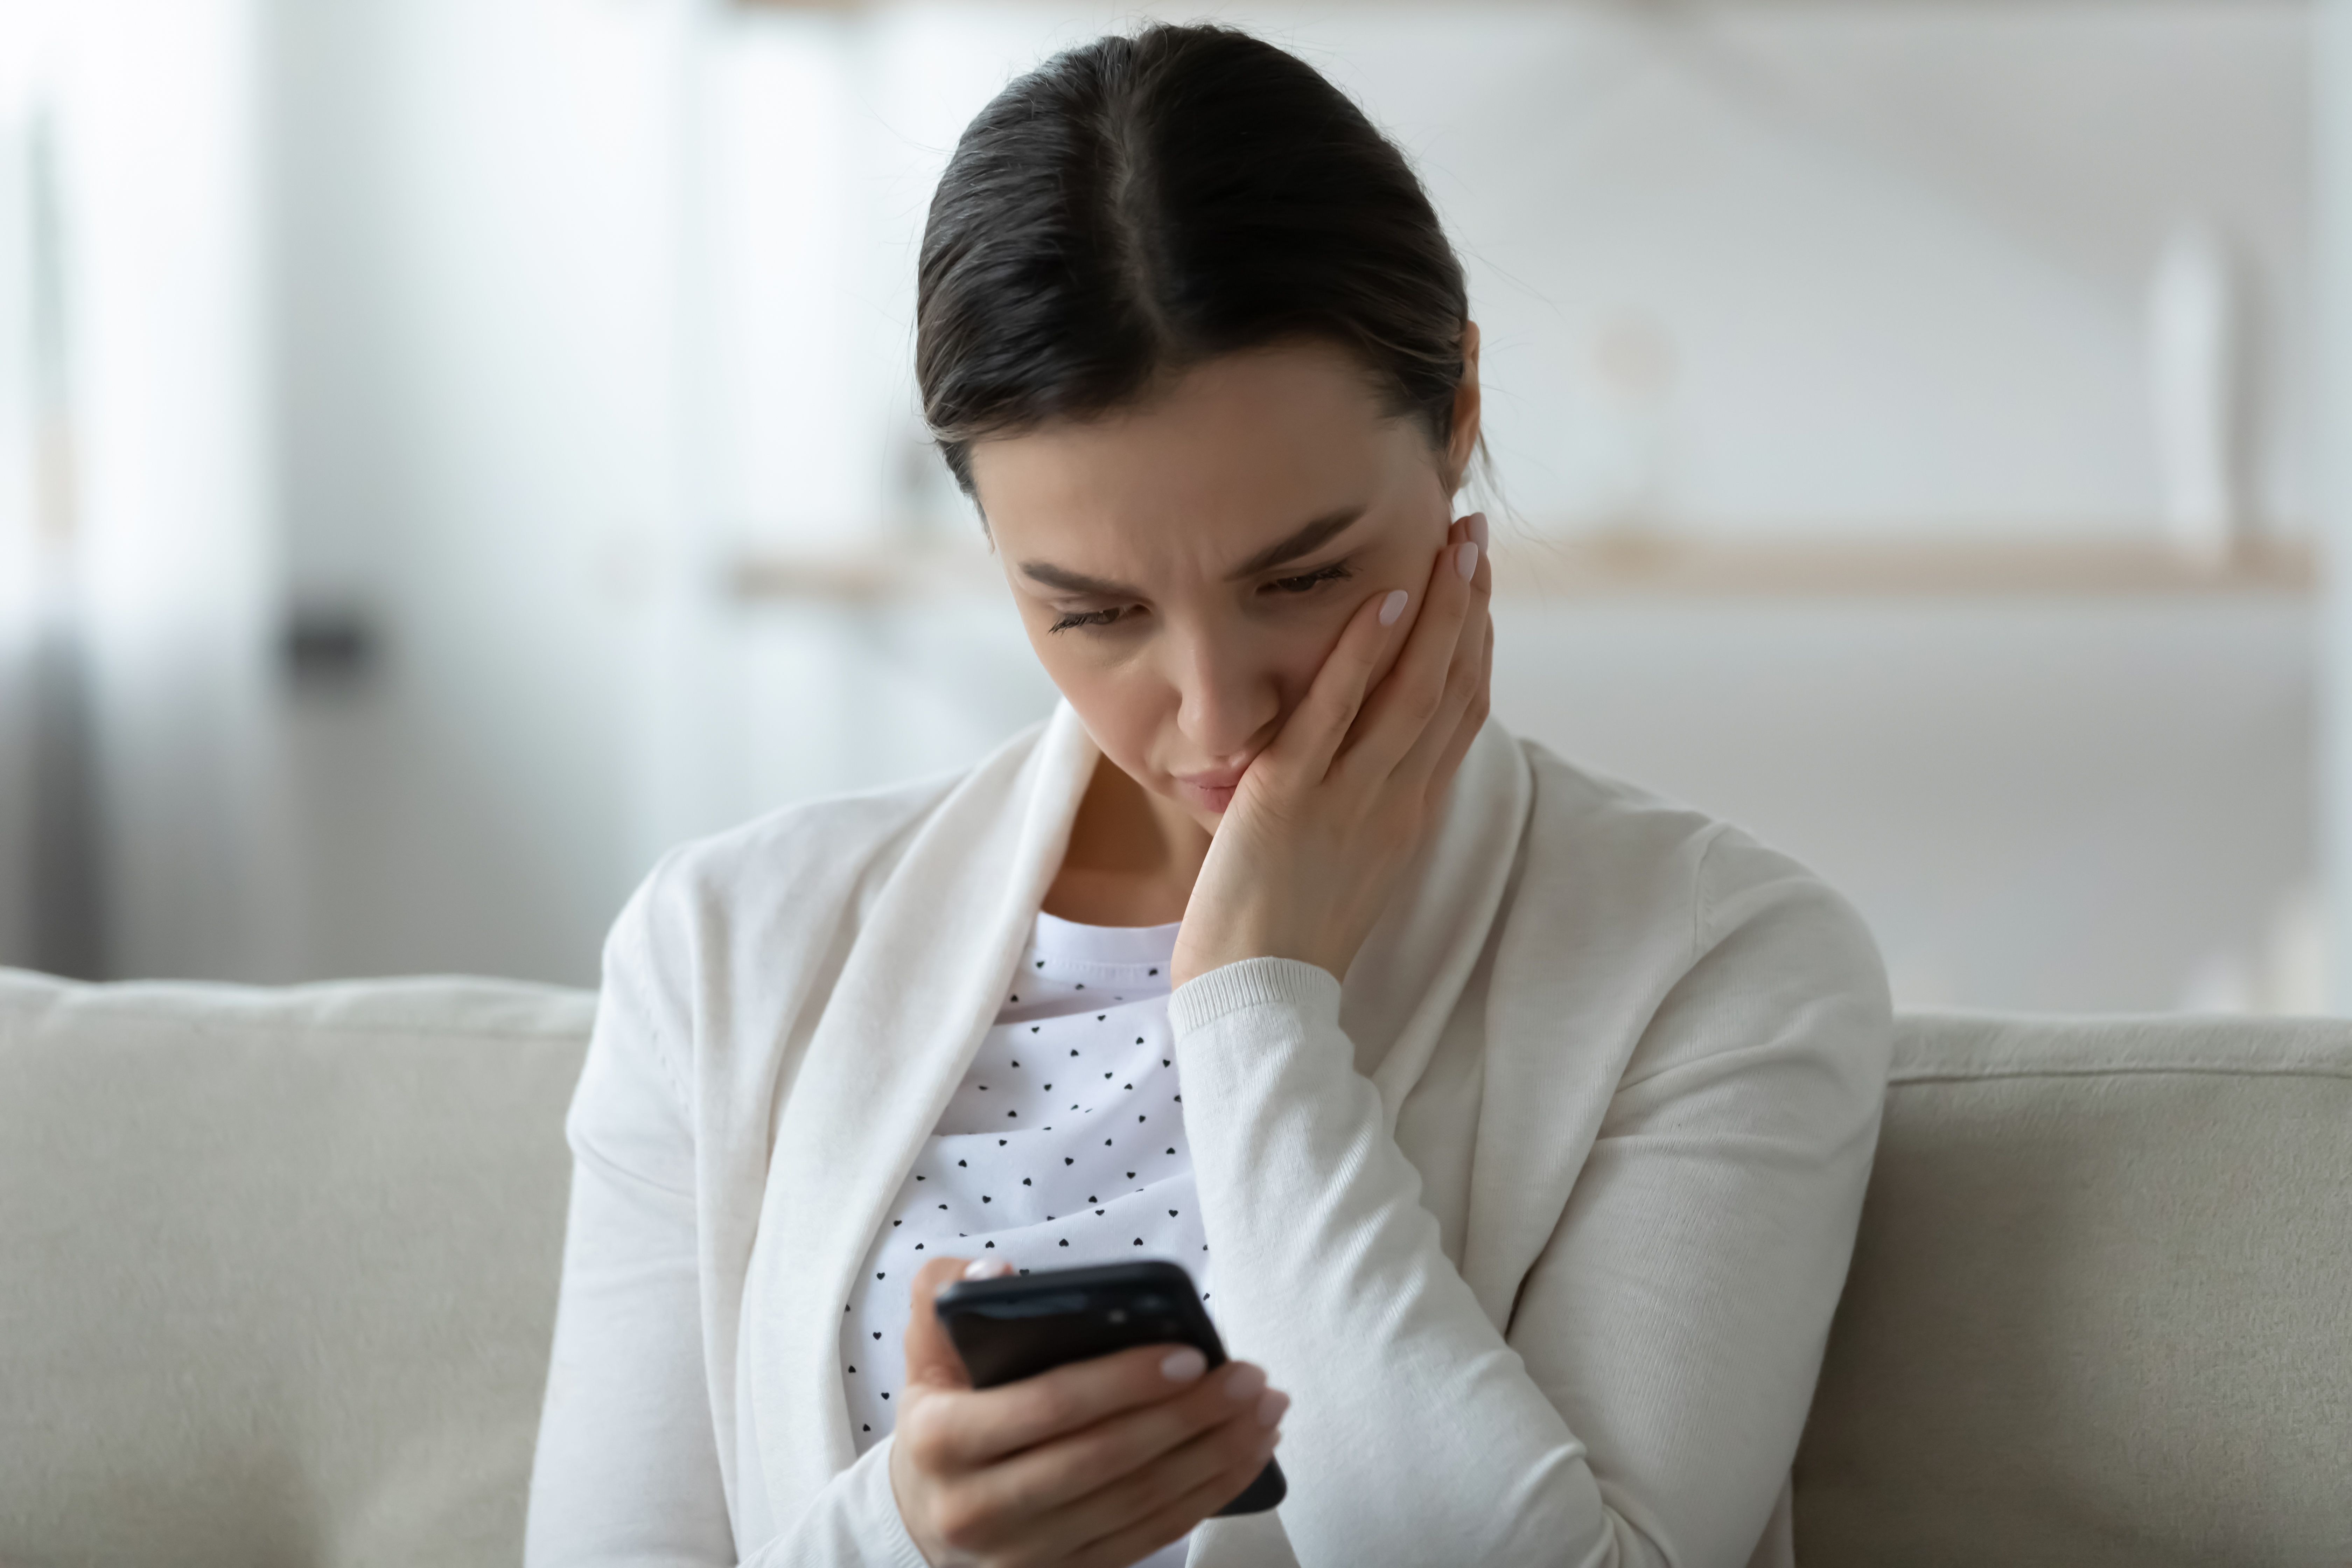 A distraught woman looking at her phone | Source: Shutterstock